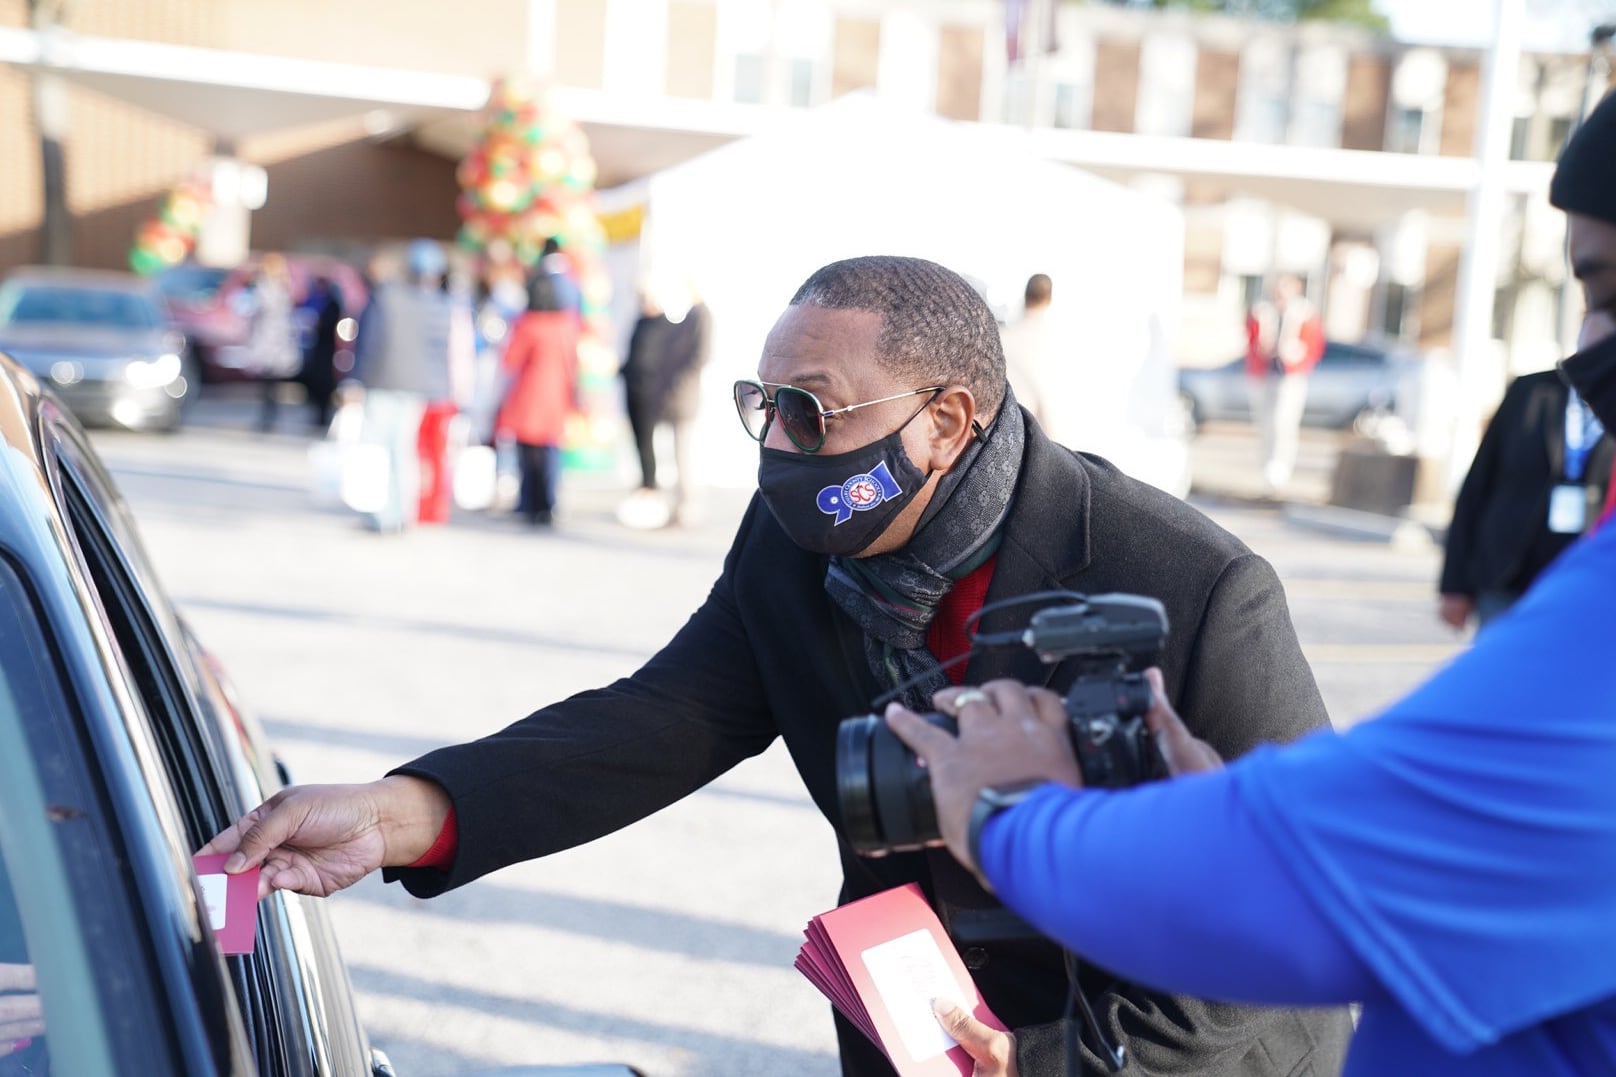 Superintendent Joris Ray hands a gift to a family through a car window as he stands outside the district’s central office in a mask and sunglasses.